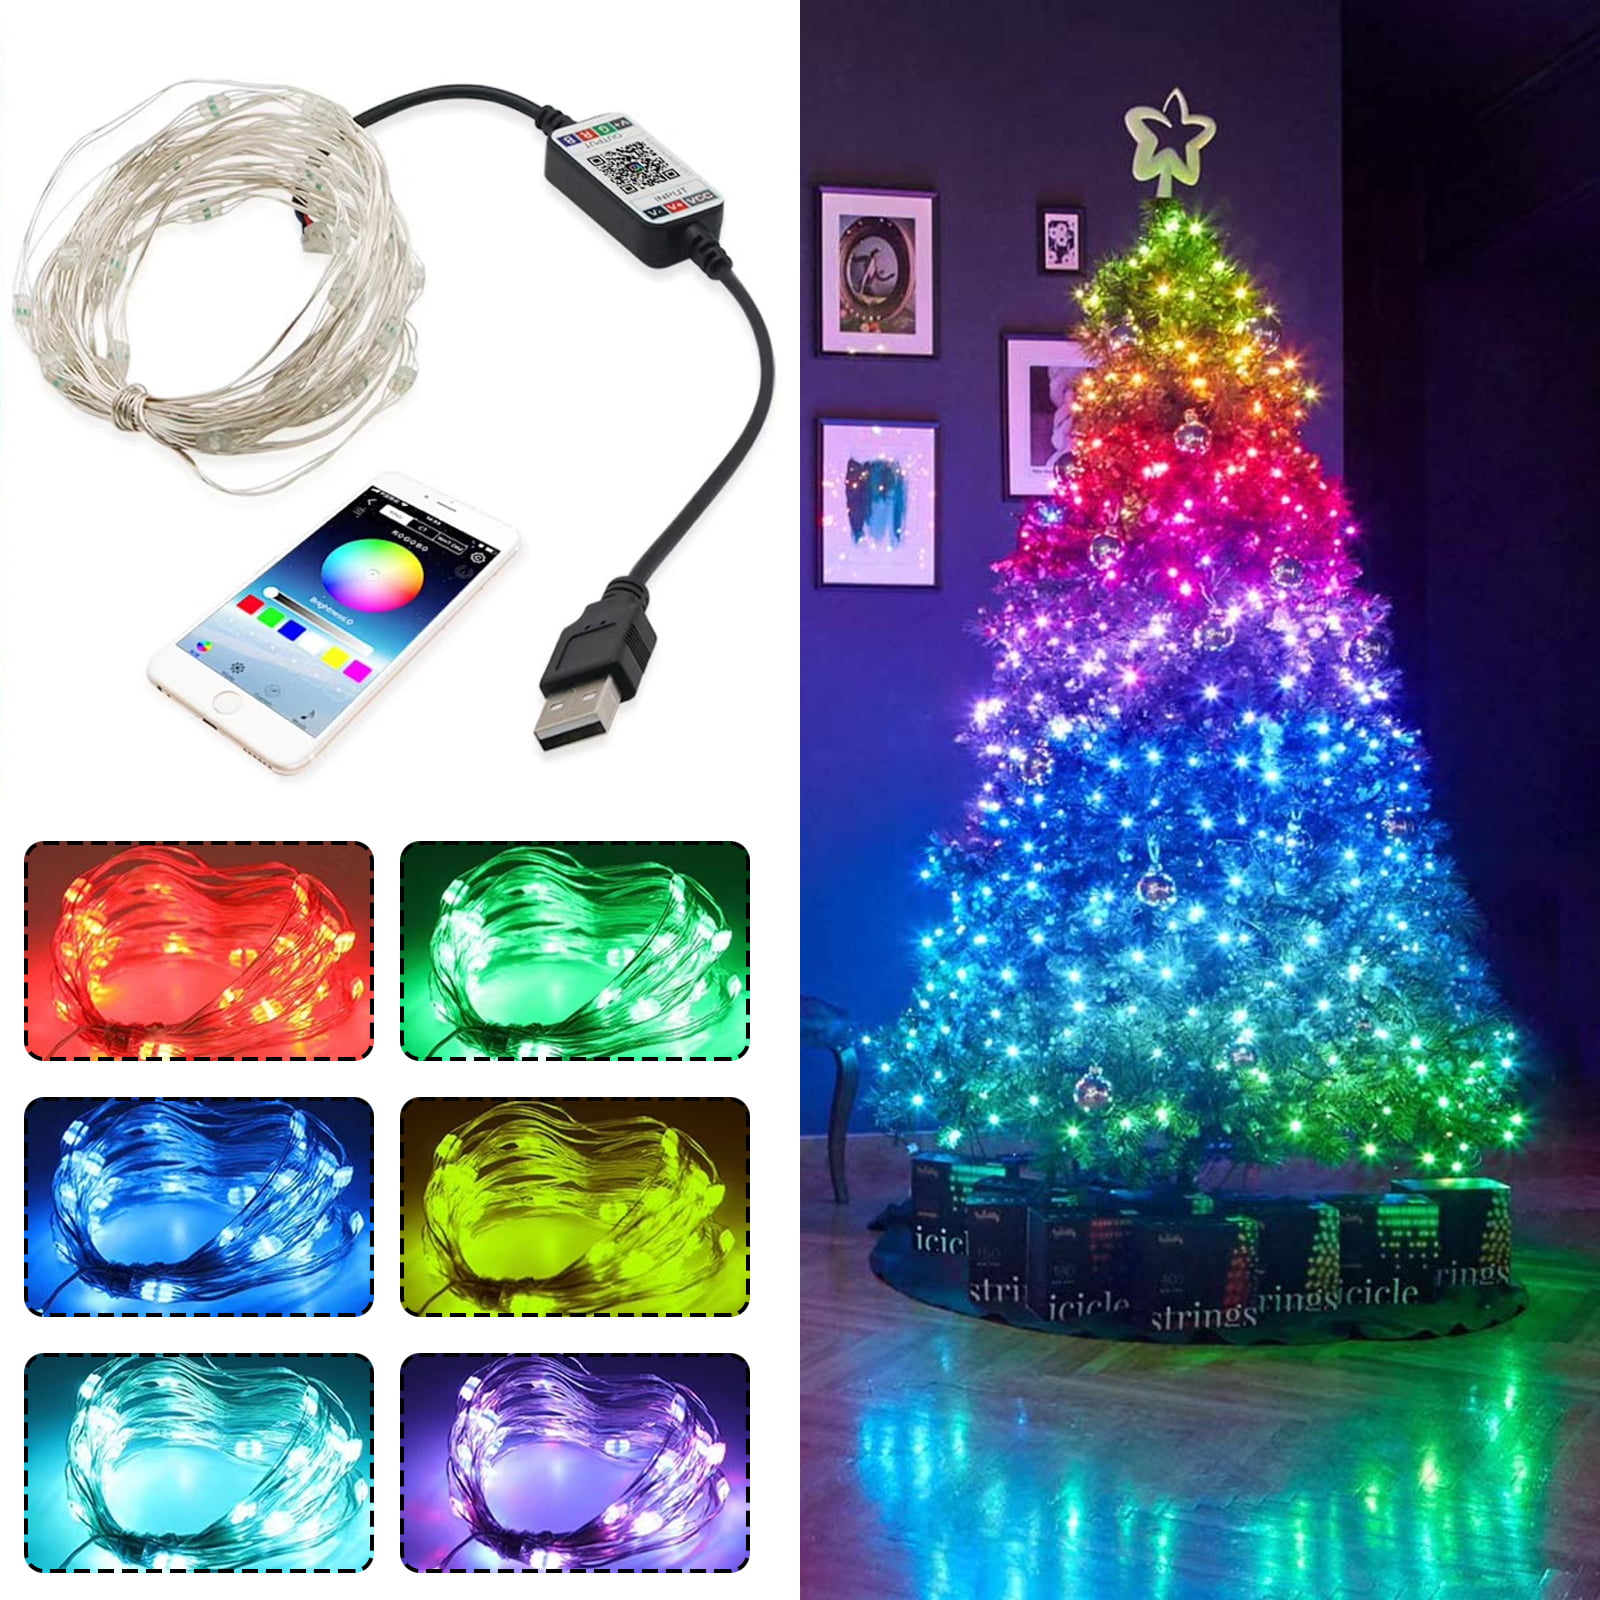 LED Christmas Tree Fairy String Lights Party Decor Bluetooth App Remote Control 